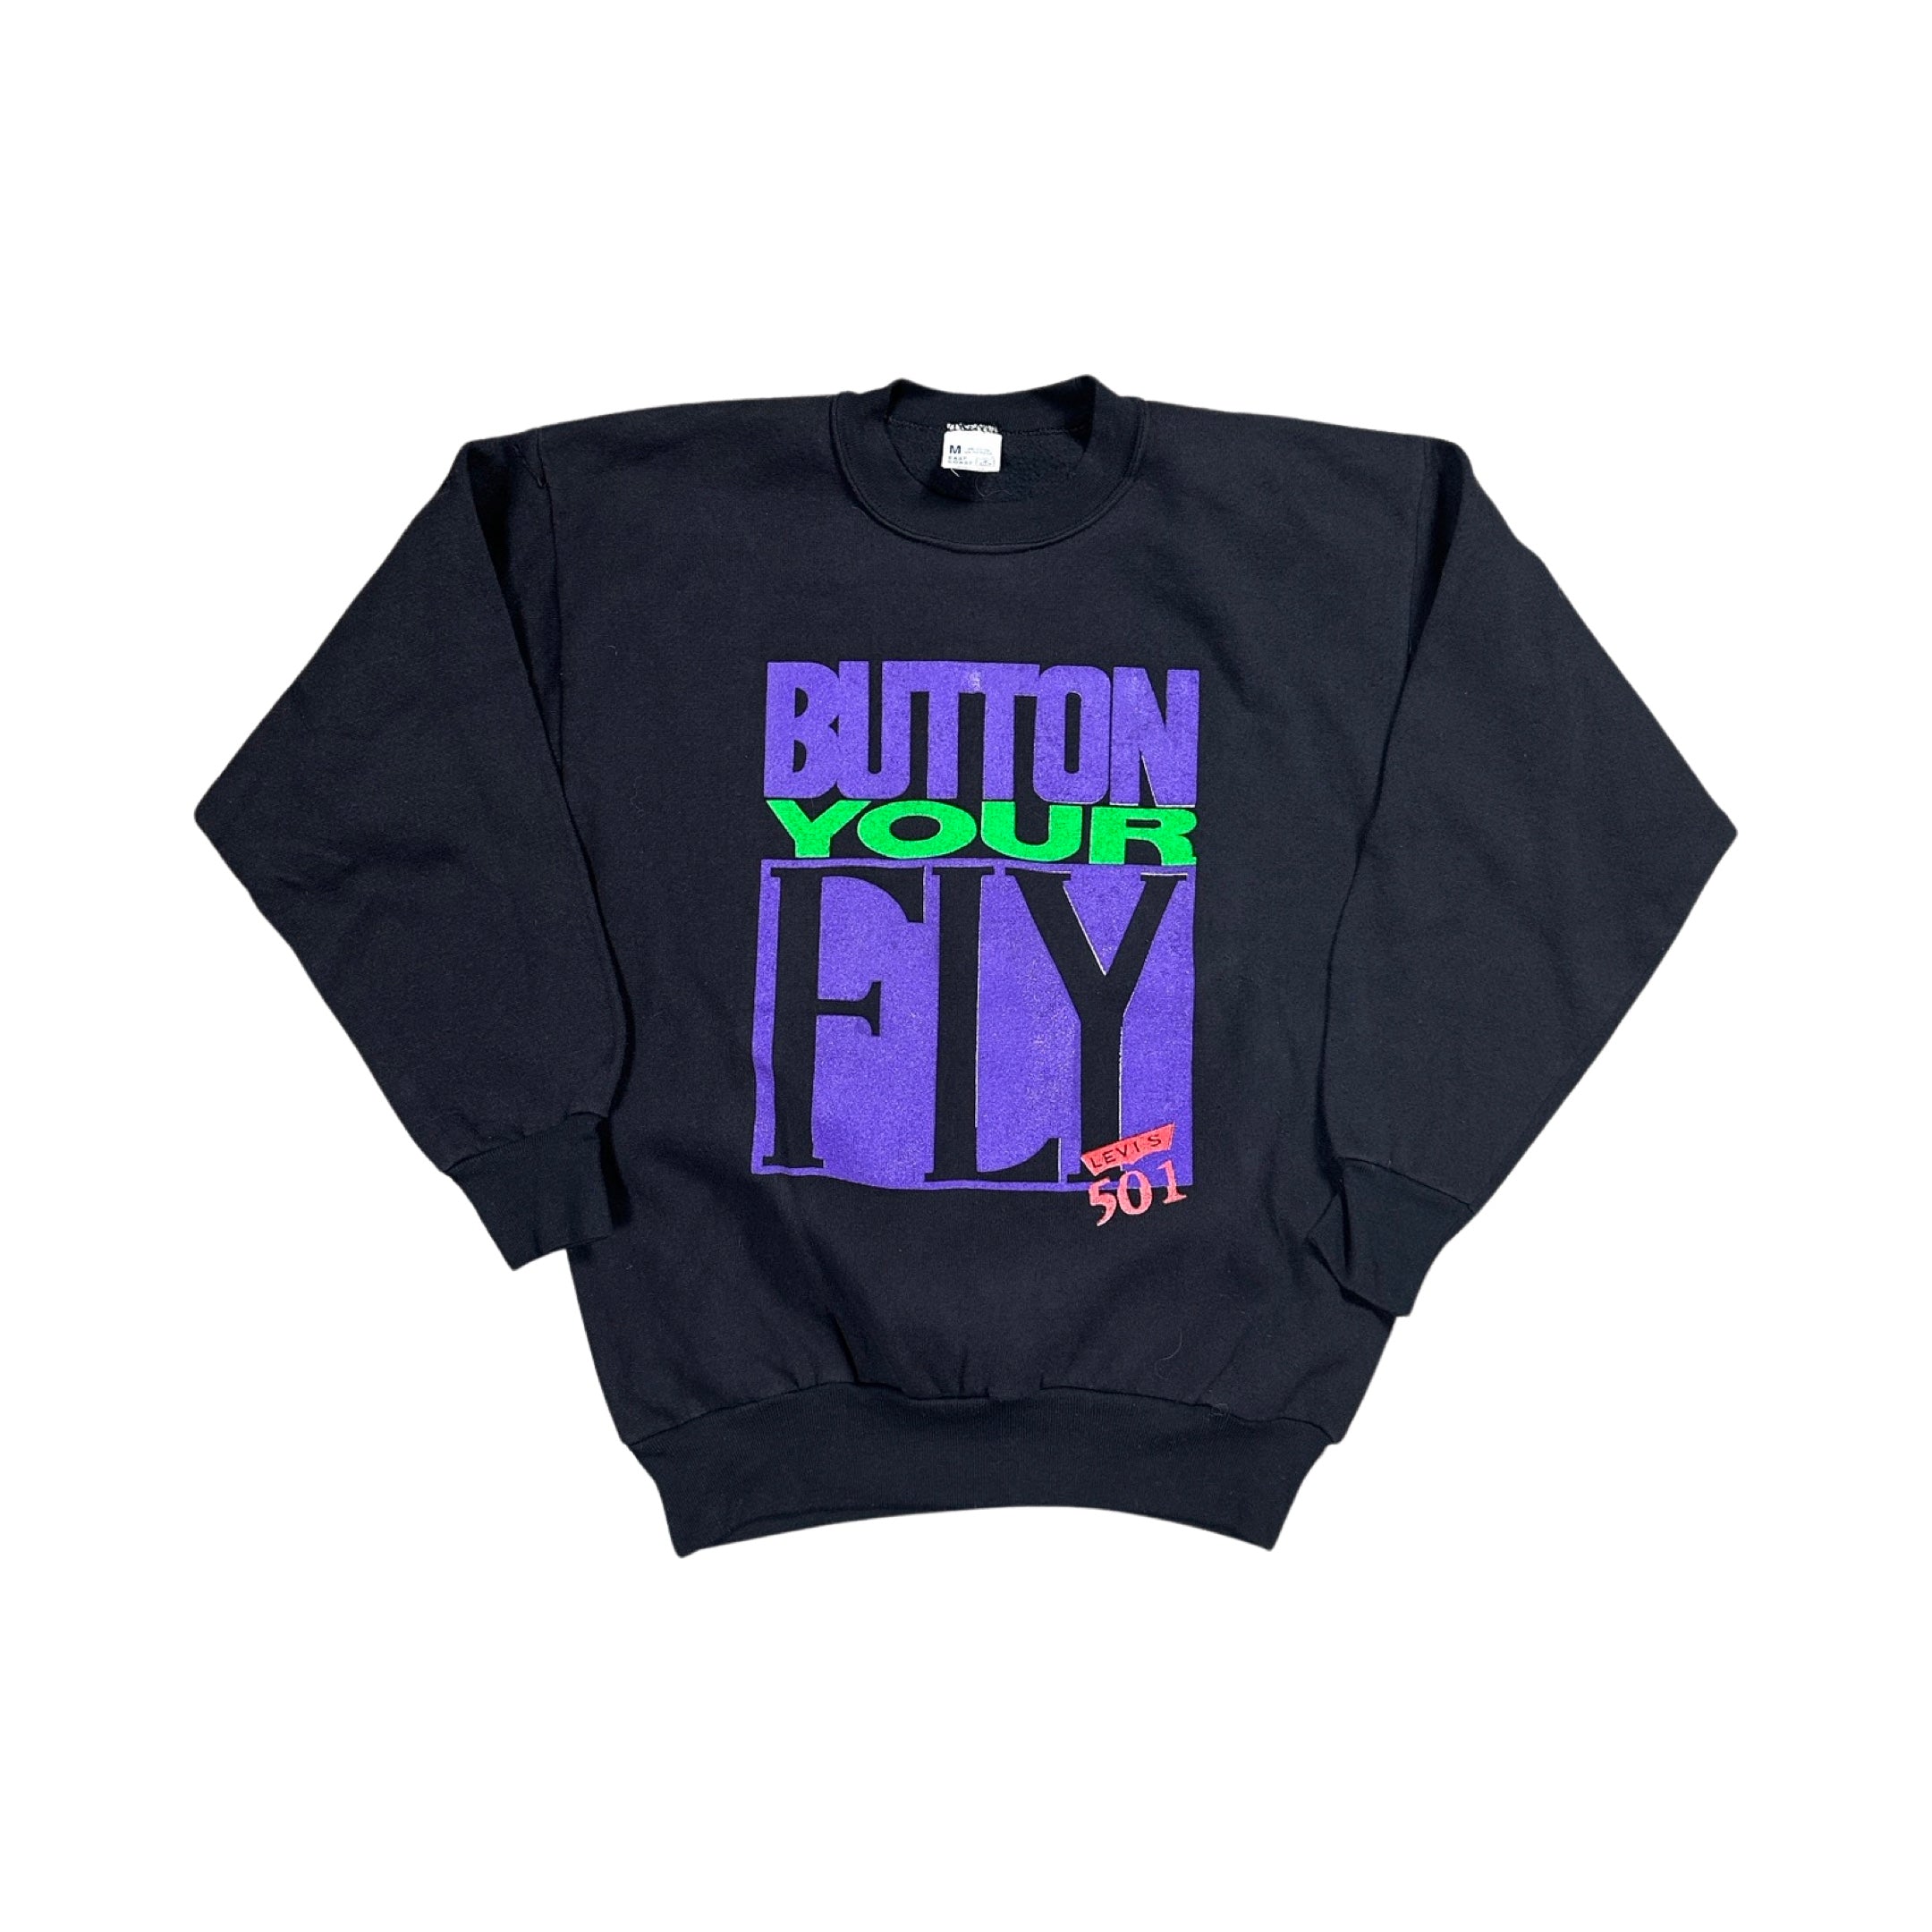 Button Your Fly 80s Levis Sweater (Small)